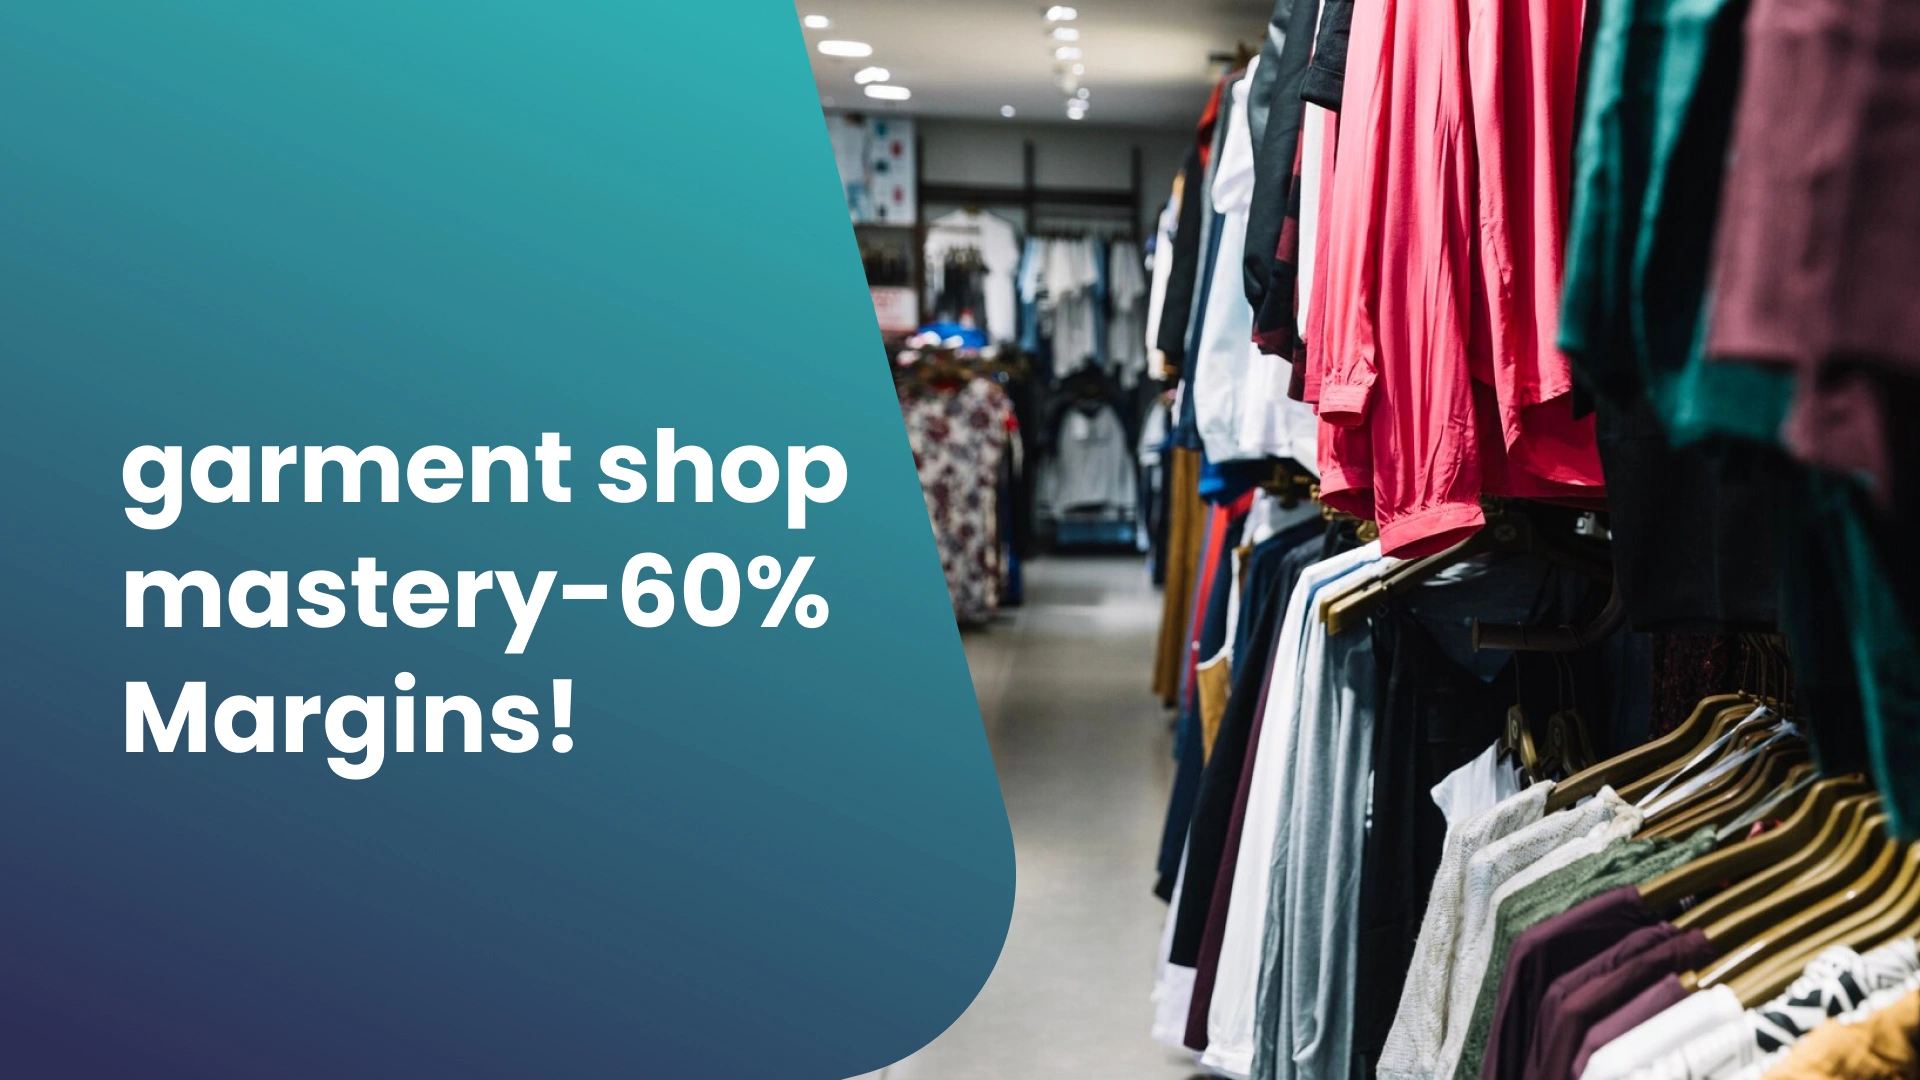 Course Trailer: Garment Shop Business Course - Earn up to 60% profit margin!. Watch to know more.